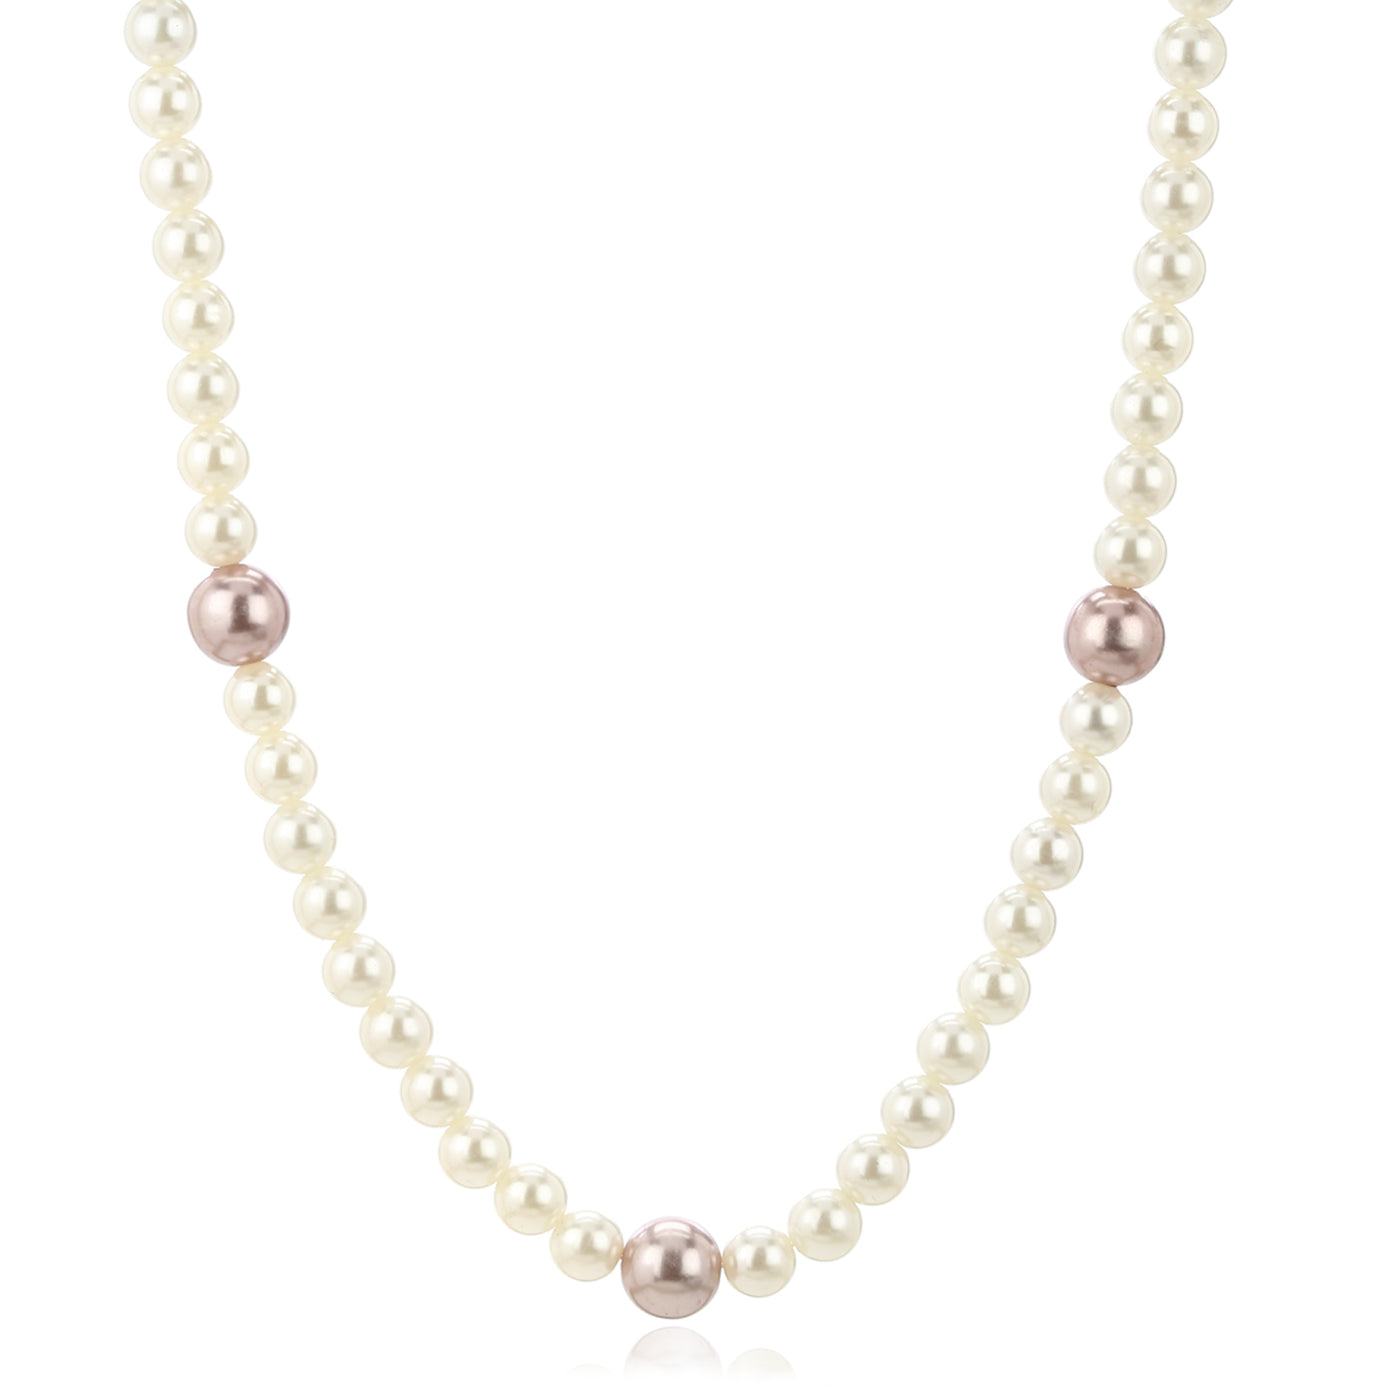 Handcrafted One Line White Flux Pearl Necklace